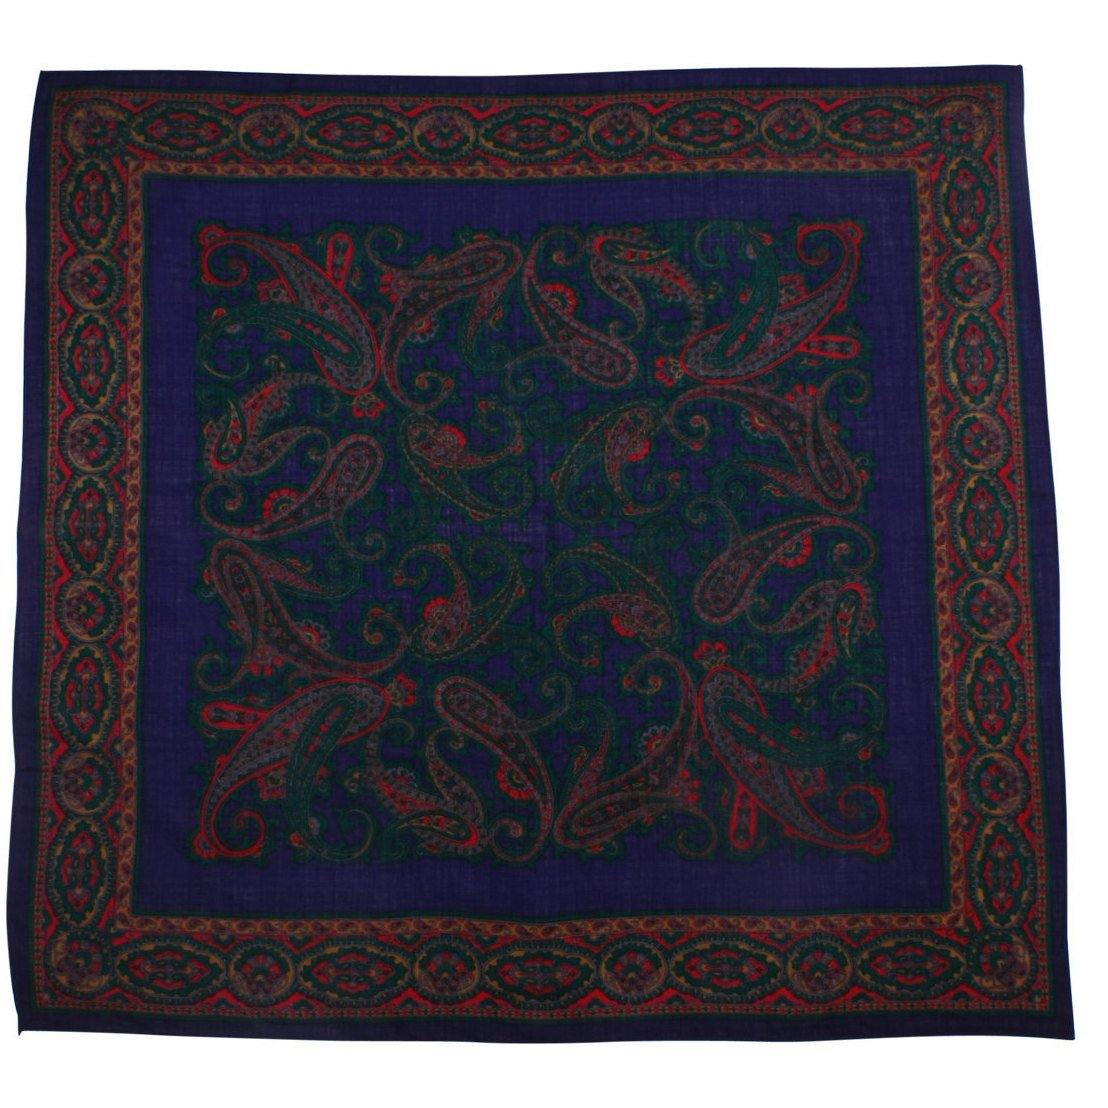 Women's baroque print wool and cotton blend scarf